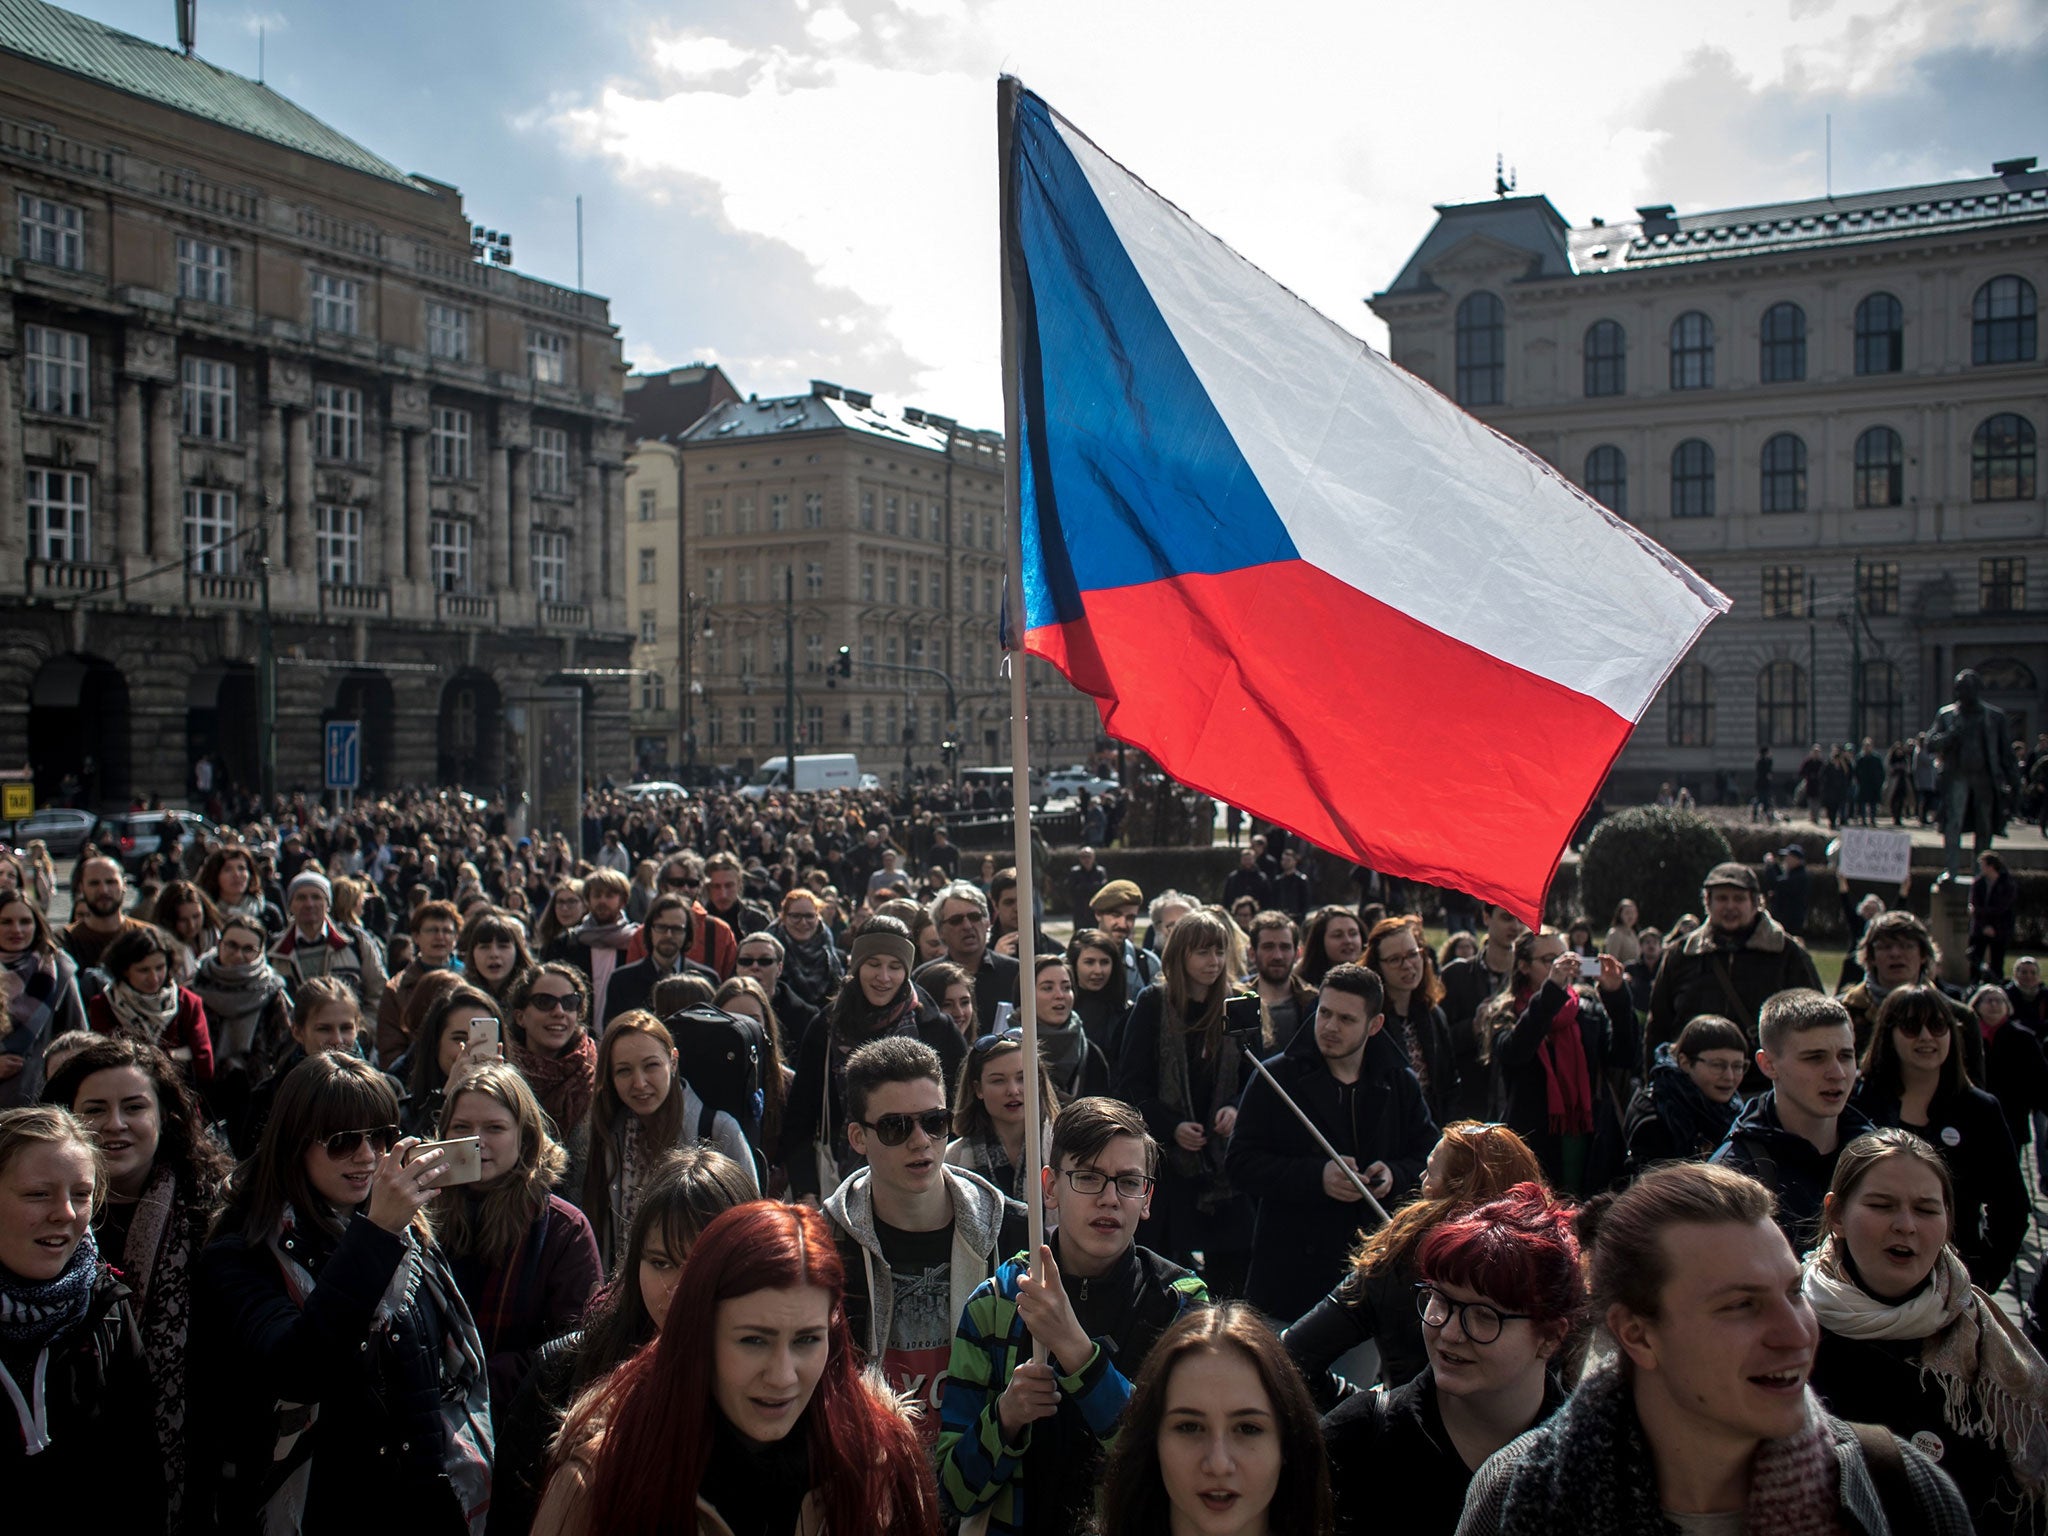 Students sing the Czech national anthem as they gathered in further protests